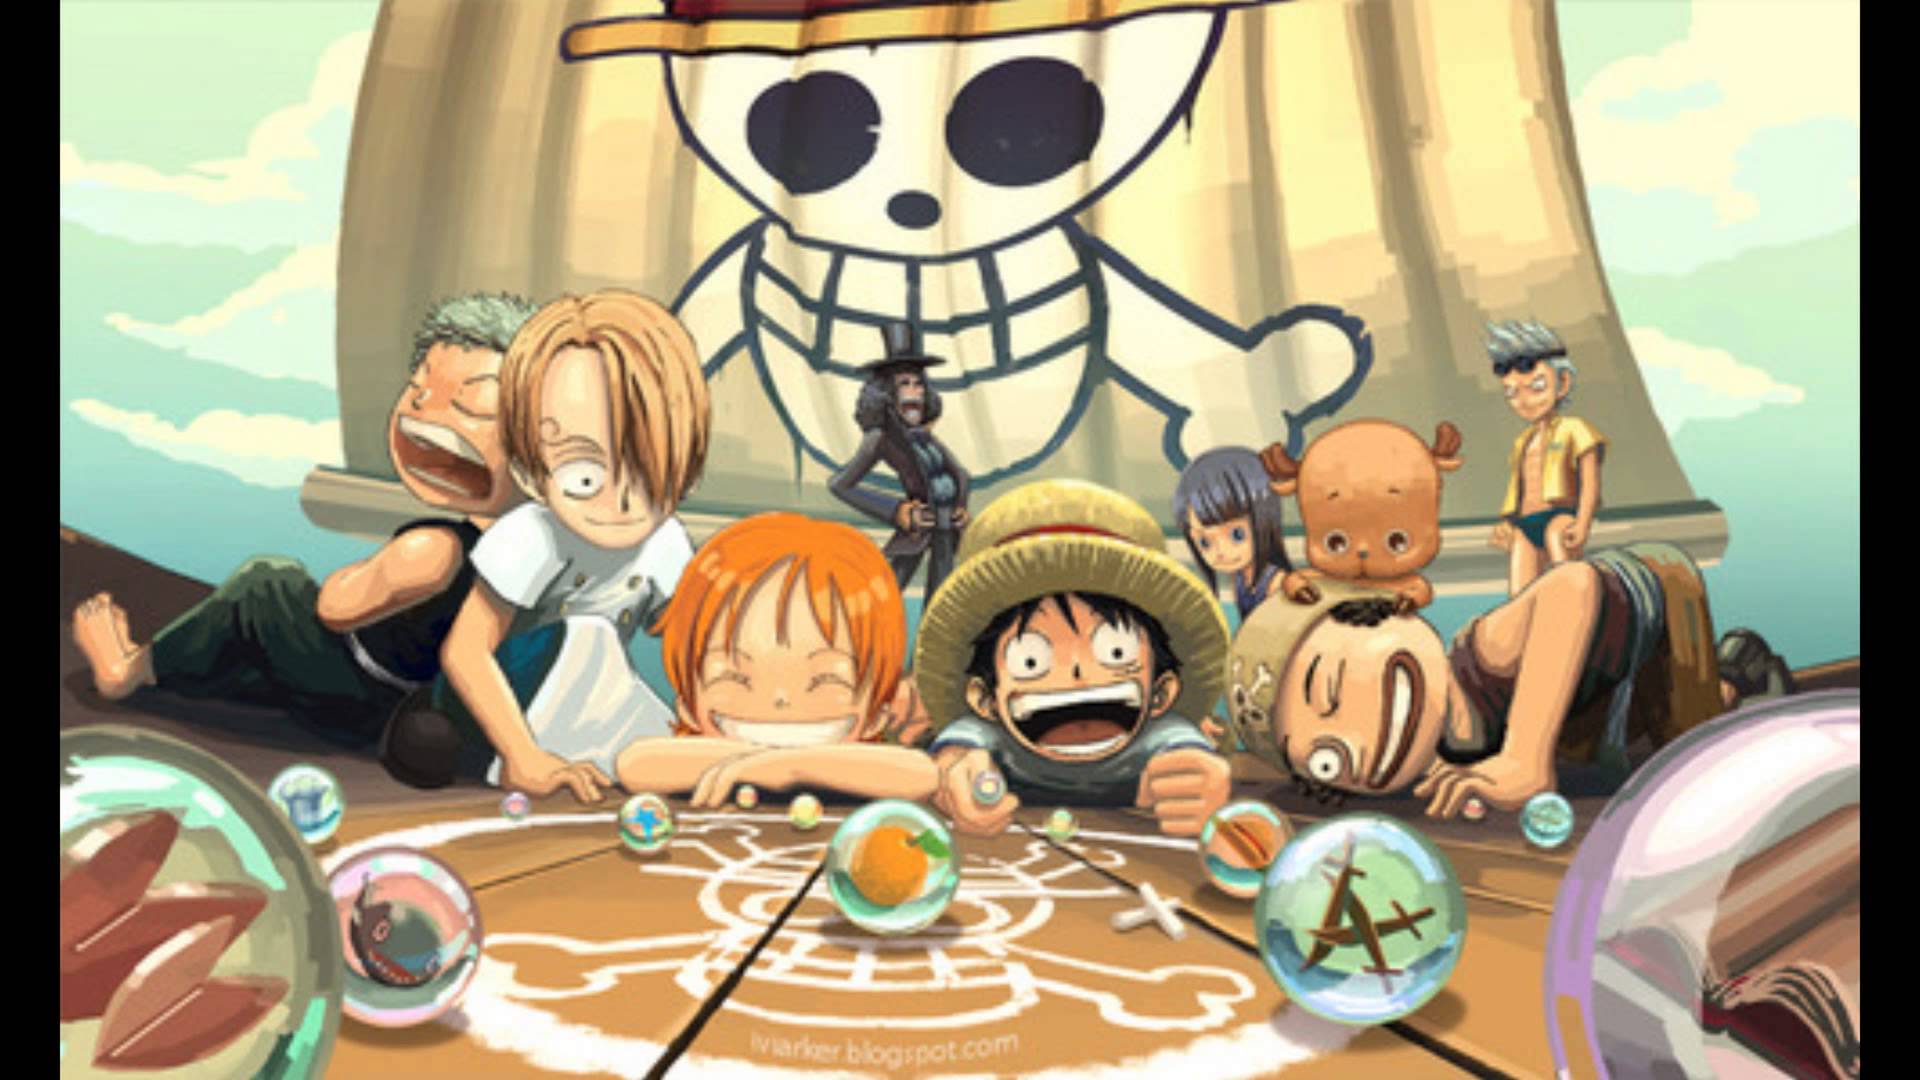 Collection Of Cool One Piece Wallpaper On Hdwallpapers - One Piece Wallpaper Hd Desktop - HD Wallpaper 